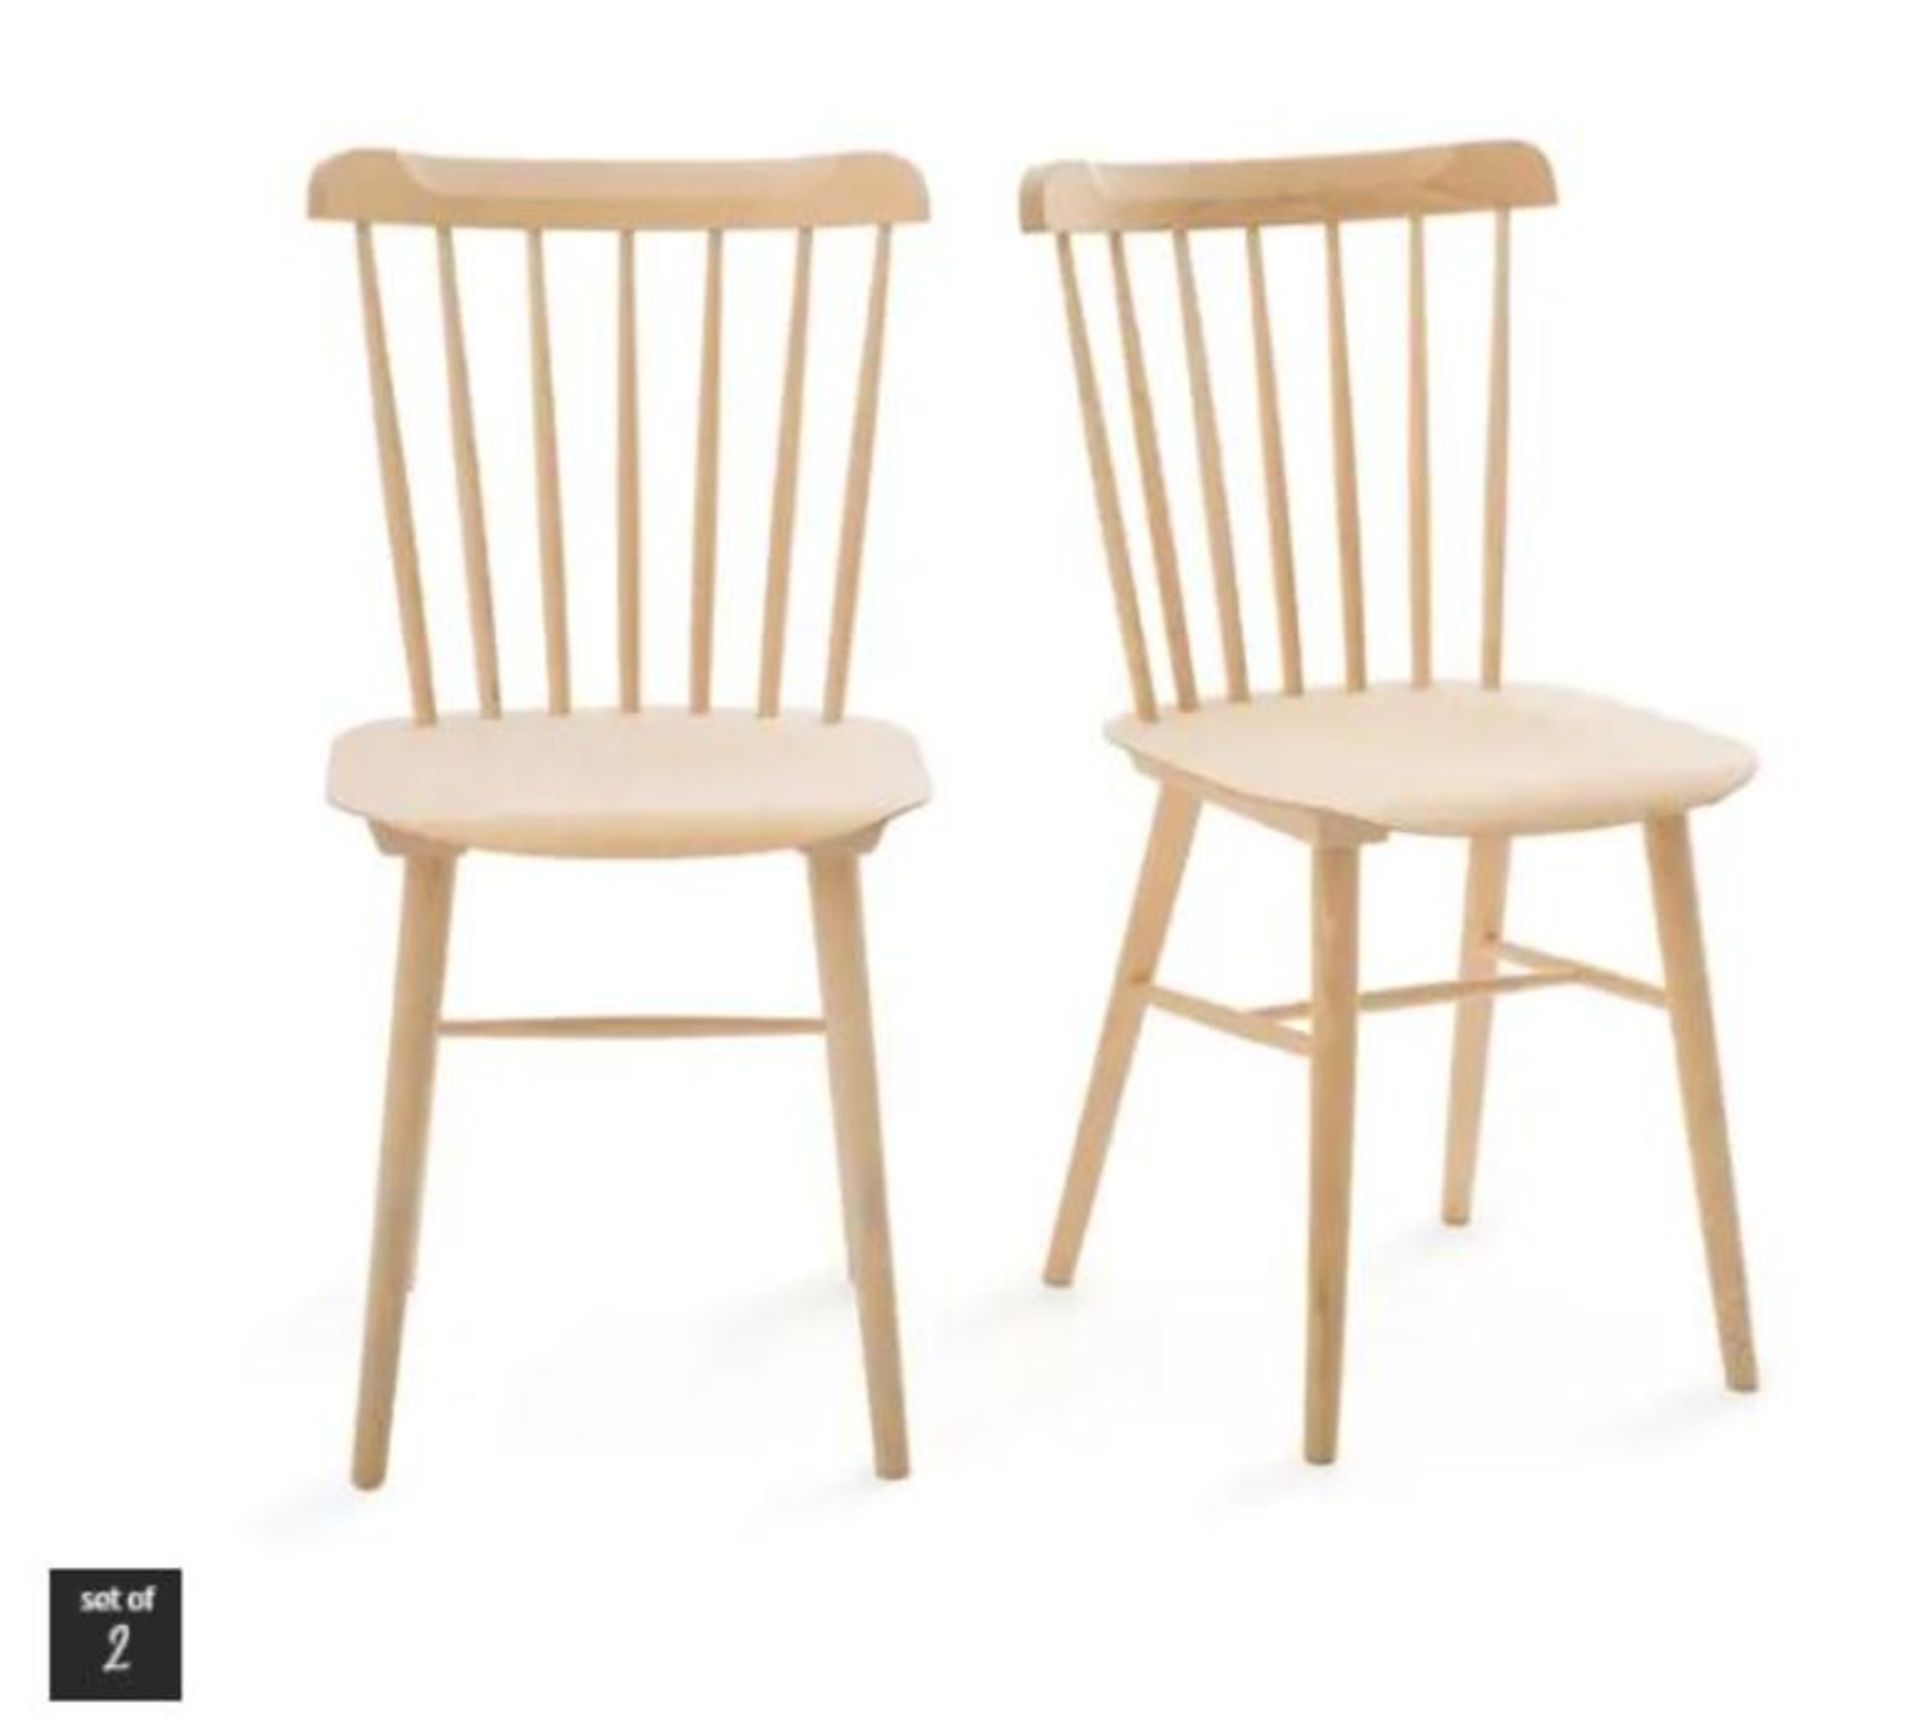 IVY SET OF 2 DINING CHAIRS / RRP £299.00 / CUSTOMER RETURN. GRADE A